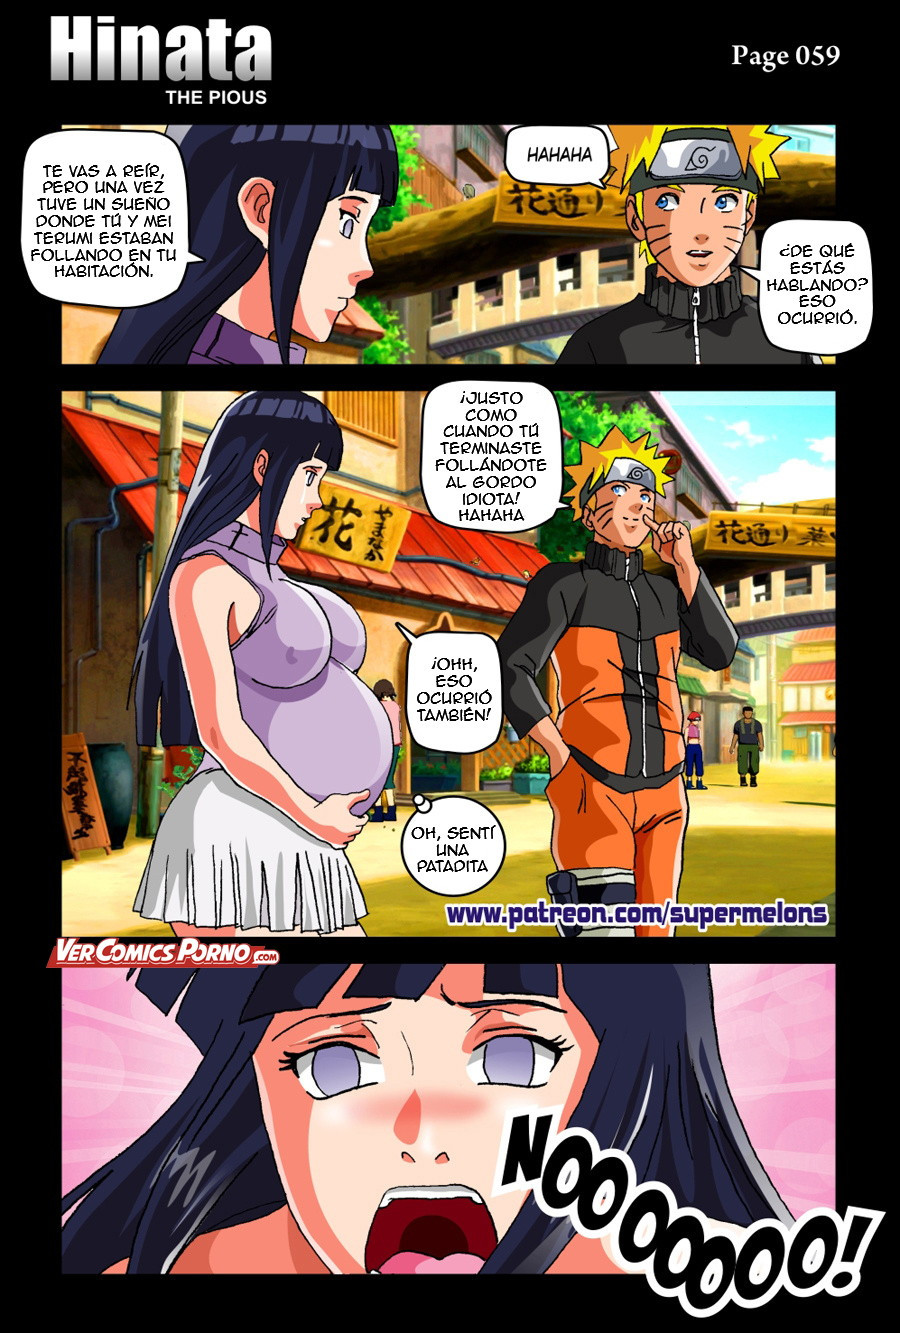 Hinata the pious image number 62